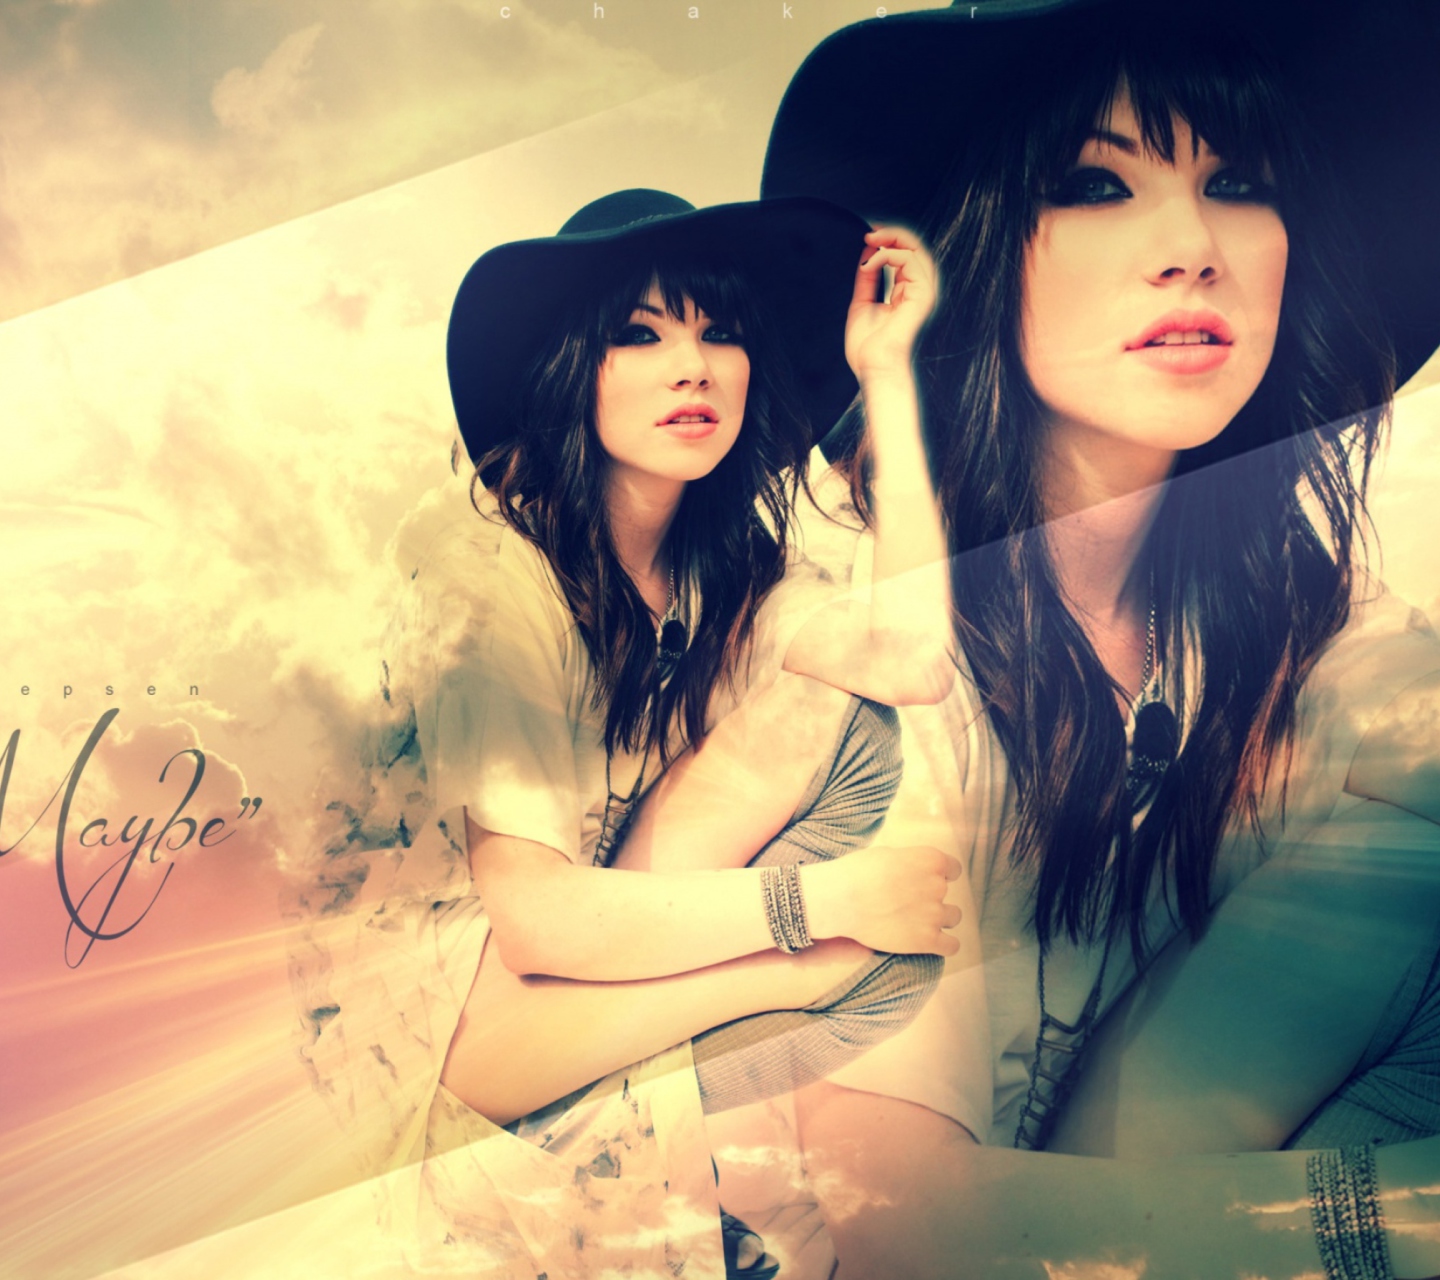 Carly Rae Jepsen - Call Me Maybe wallpaper 1440x1280